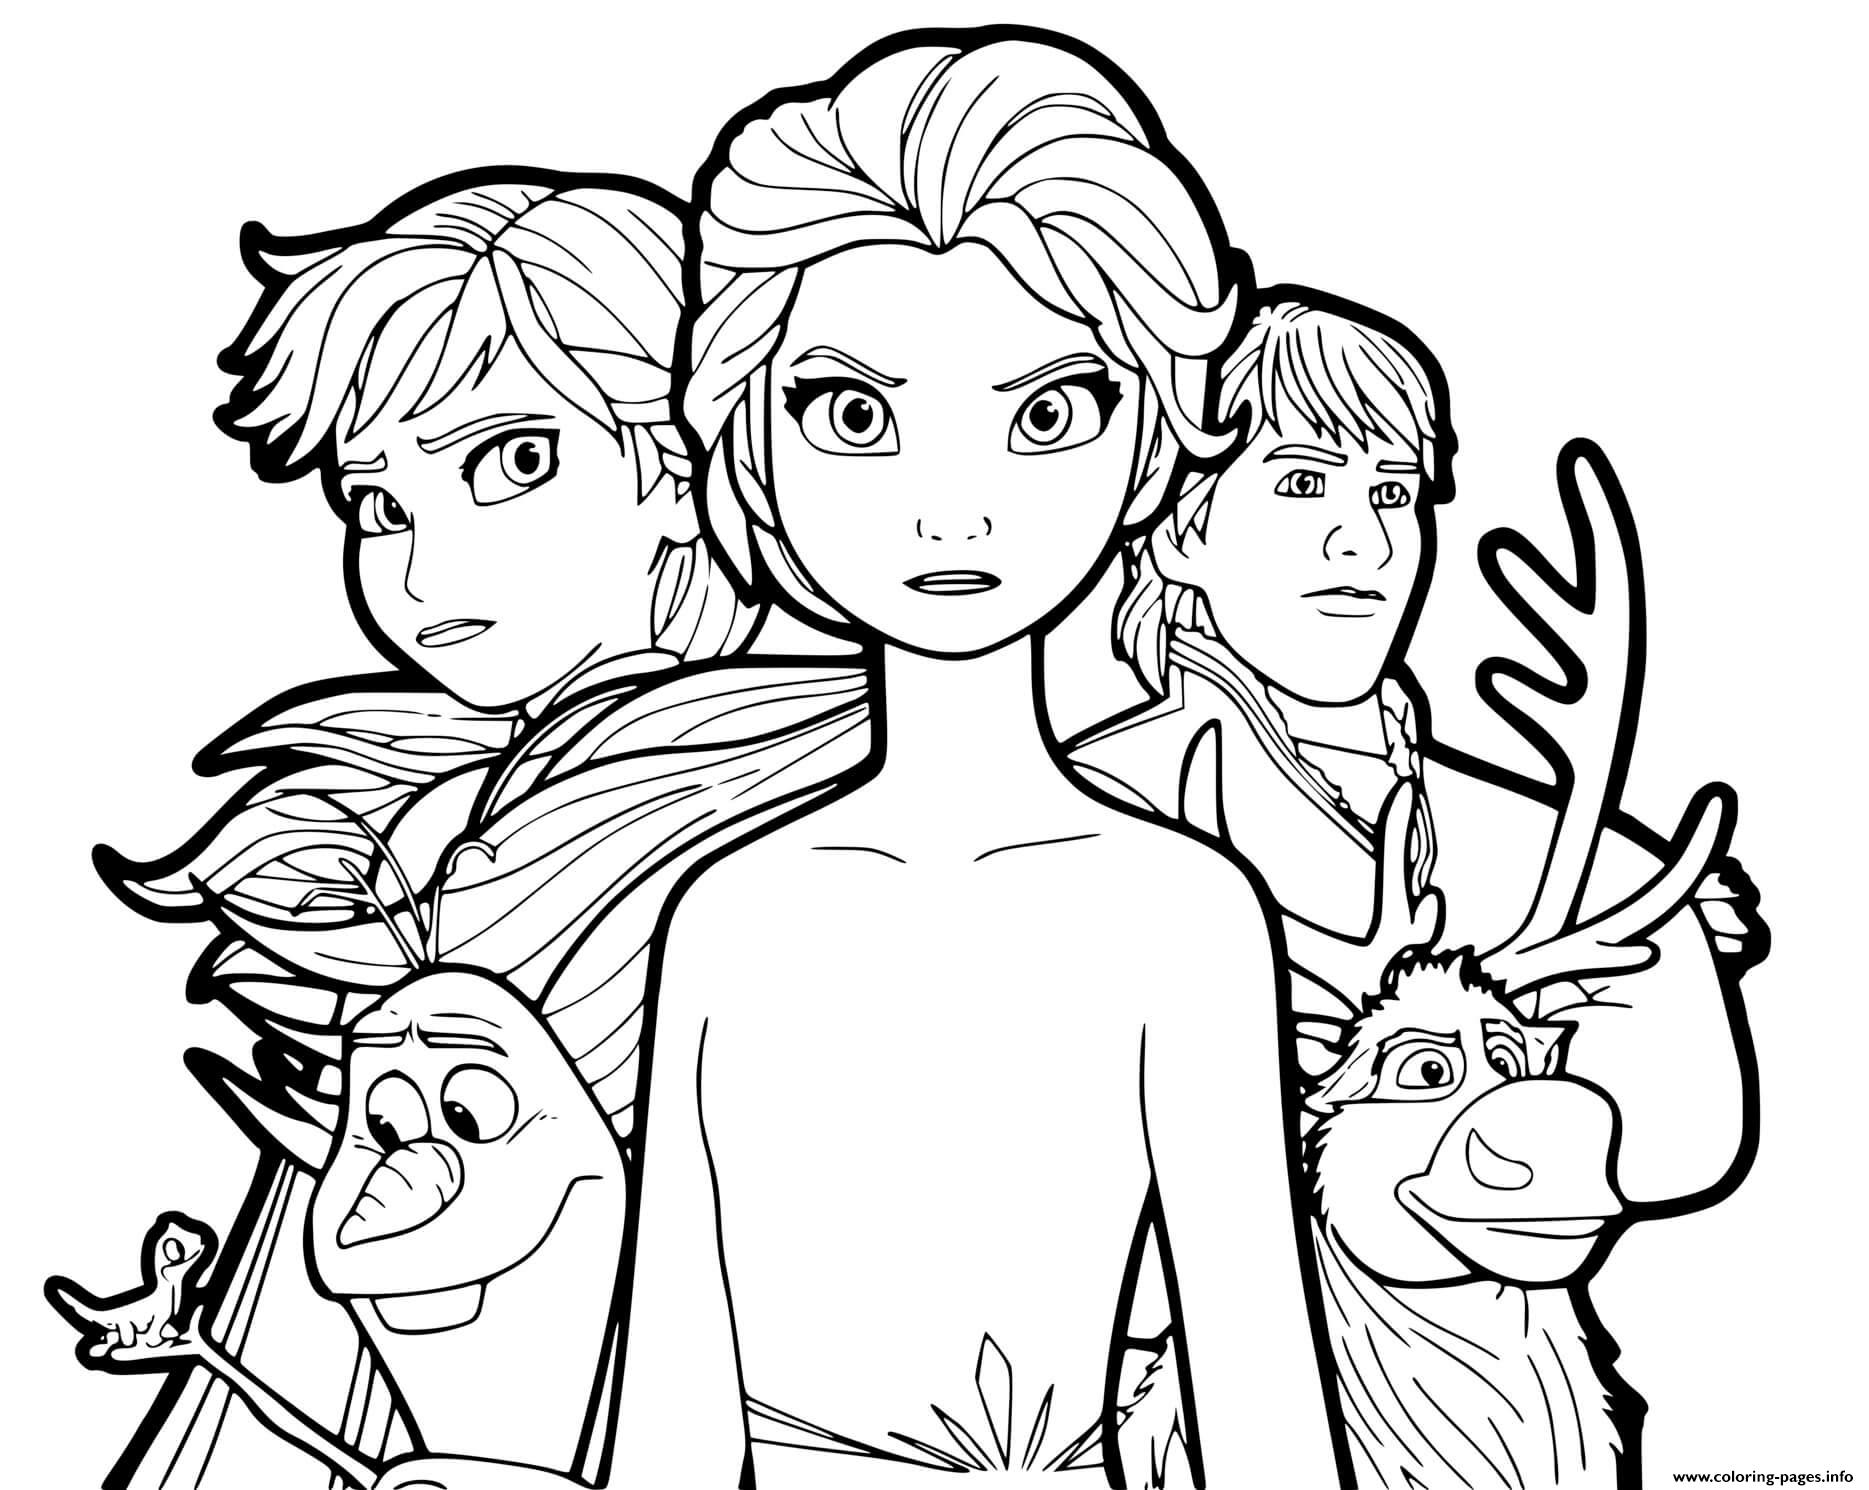 Download Frozen 2 Ready To Fight For Love And Justice Coloring ...